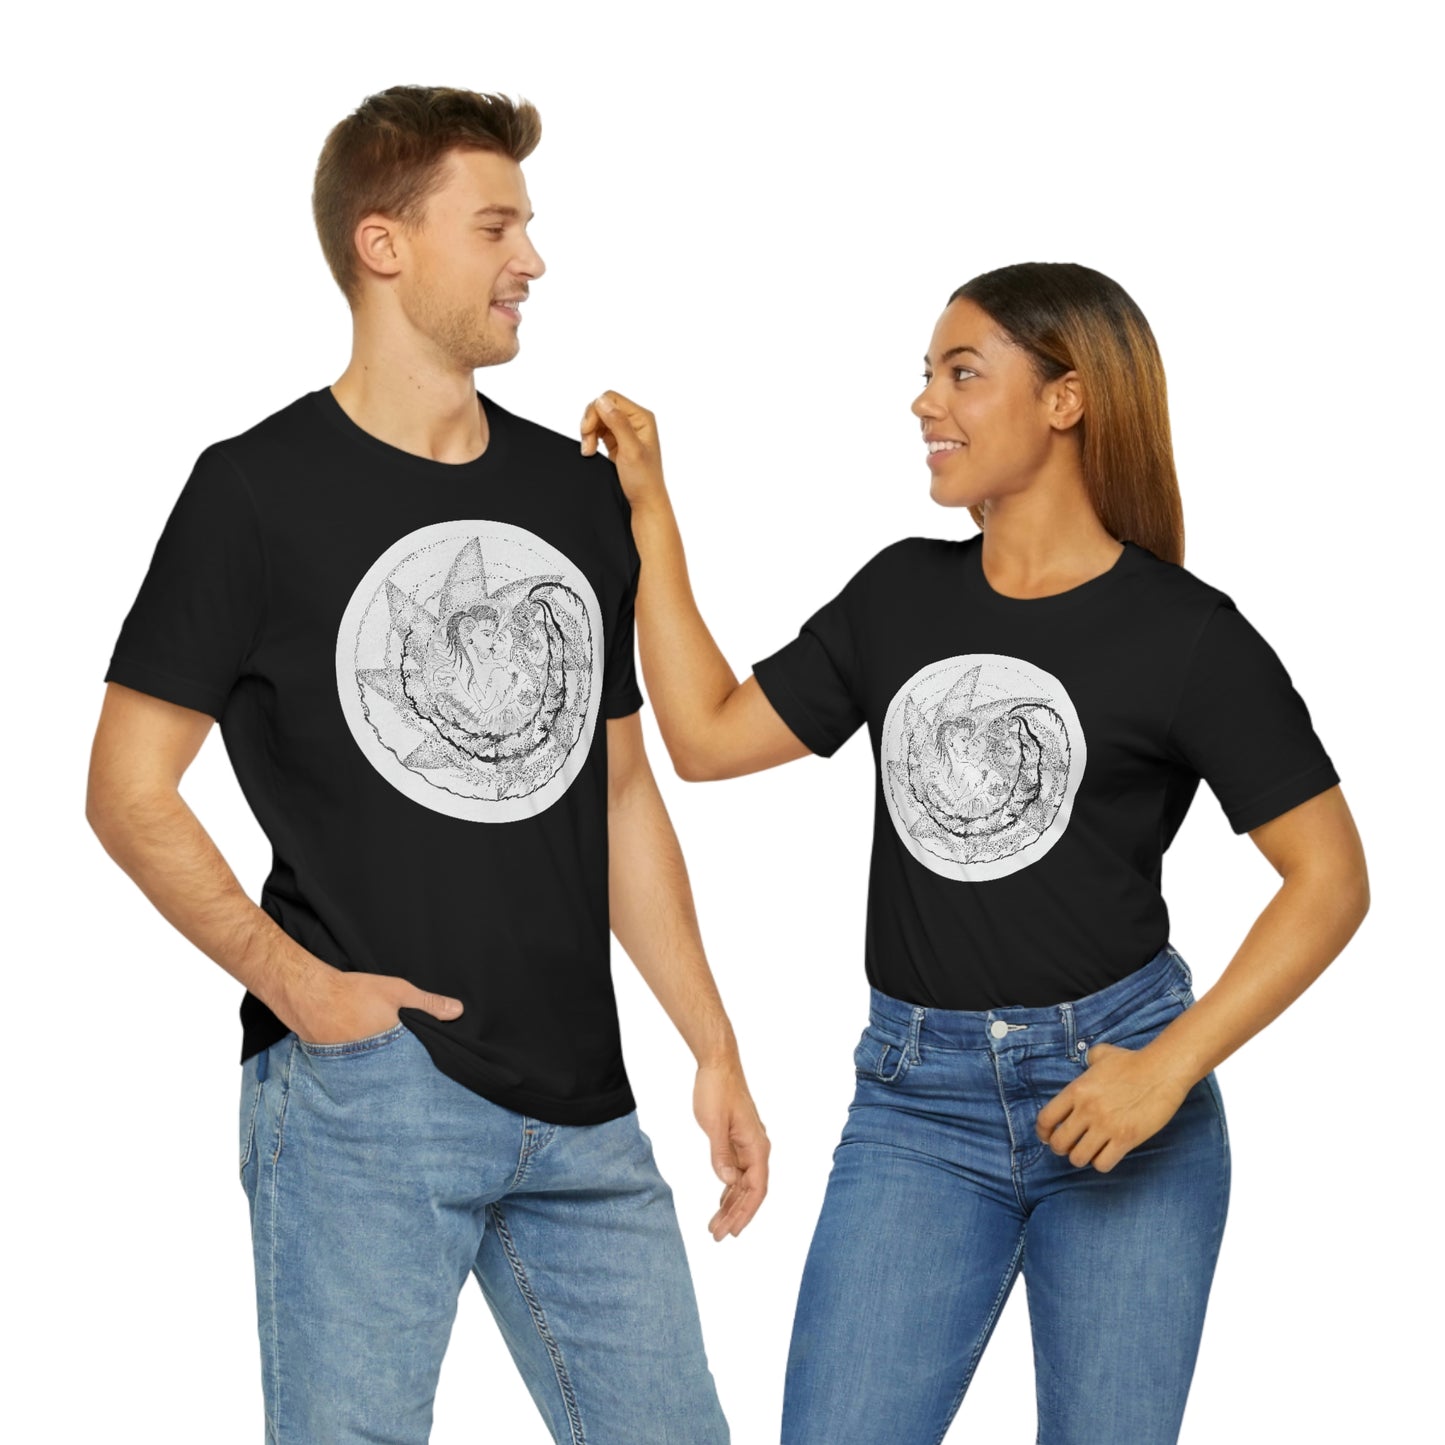 Chinese Zodiac Sign T Shirt (Pig) Unisex Regular Fit Limited Edition